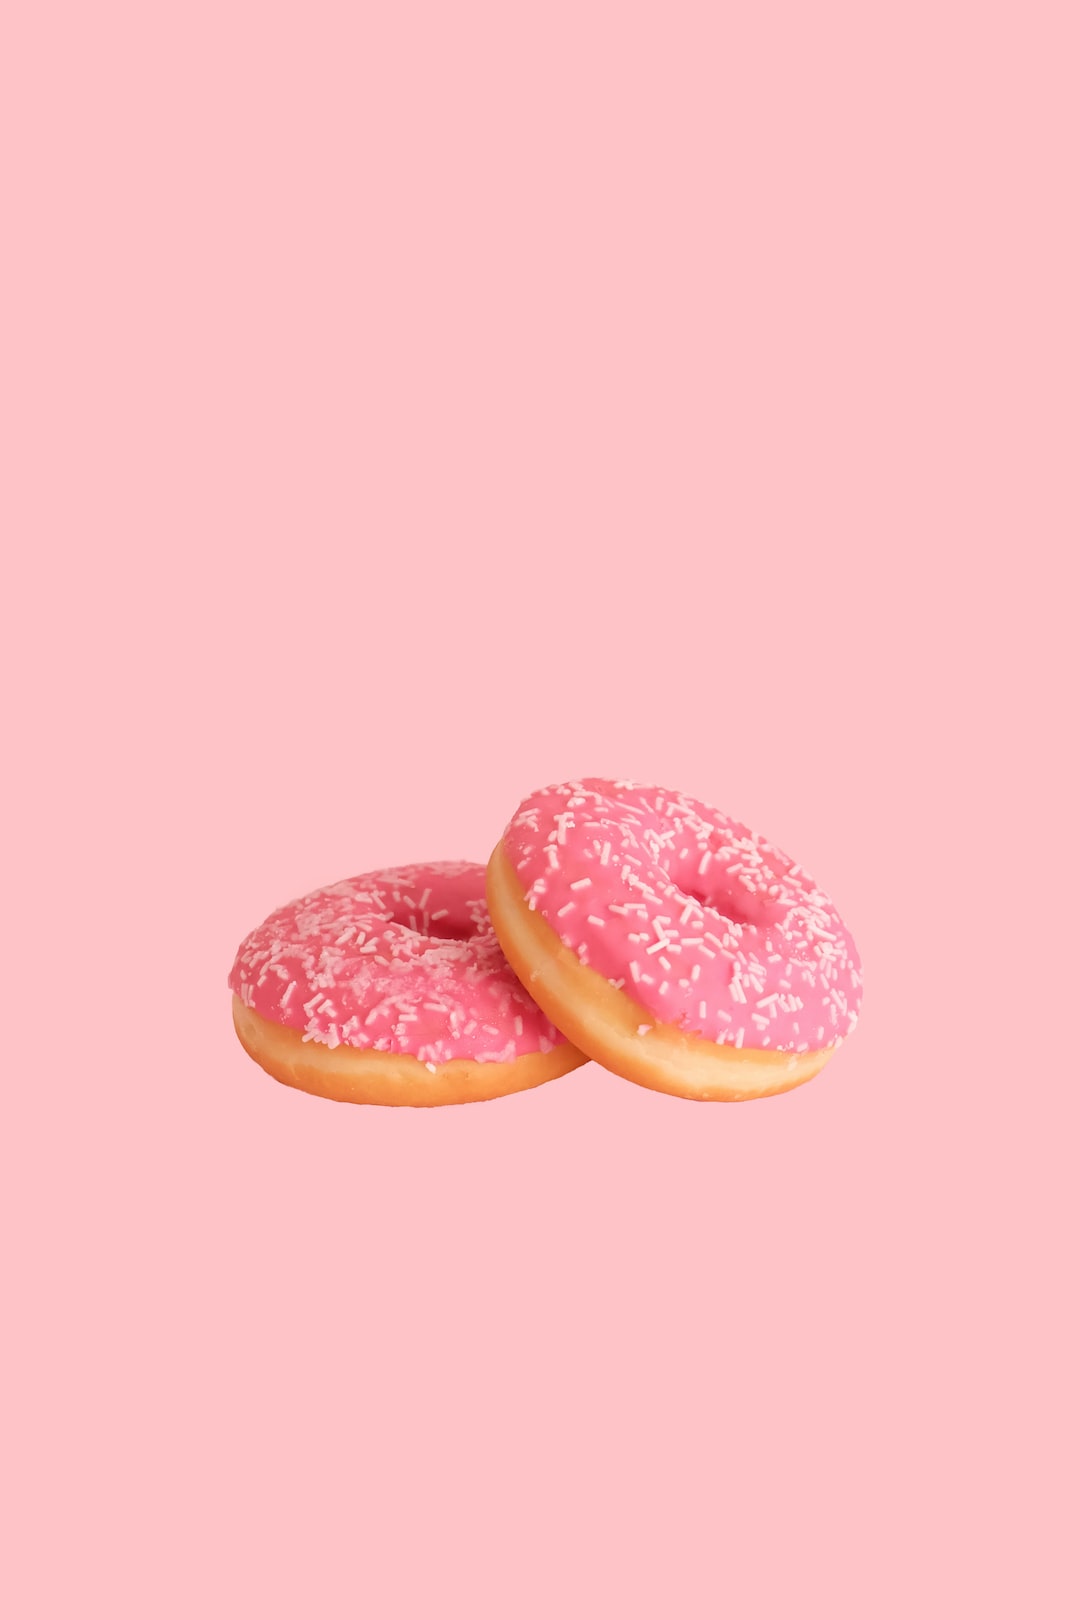 Cute DonutWallpapers